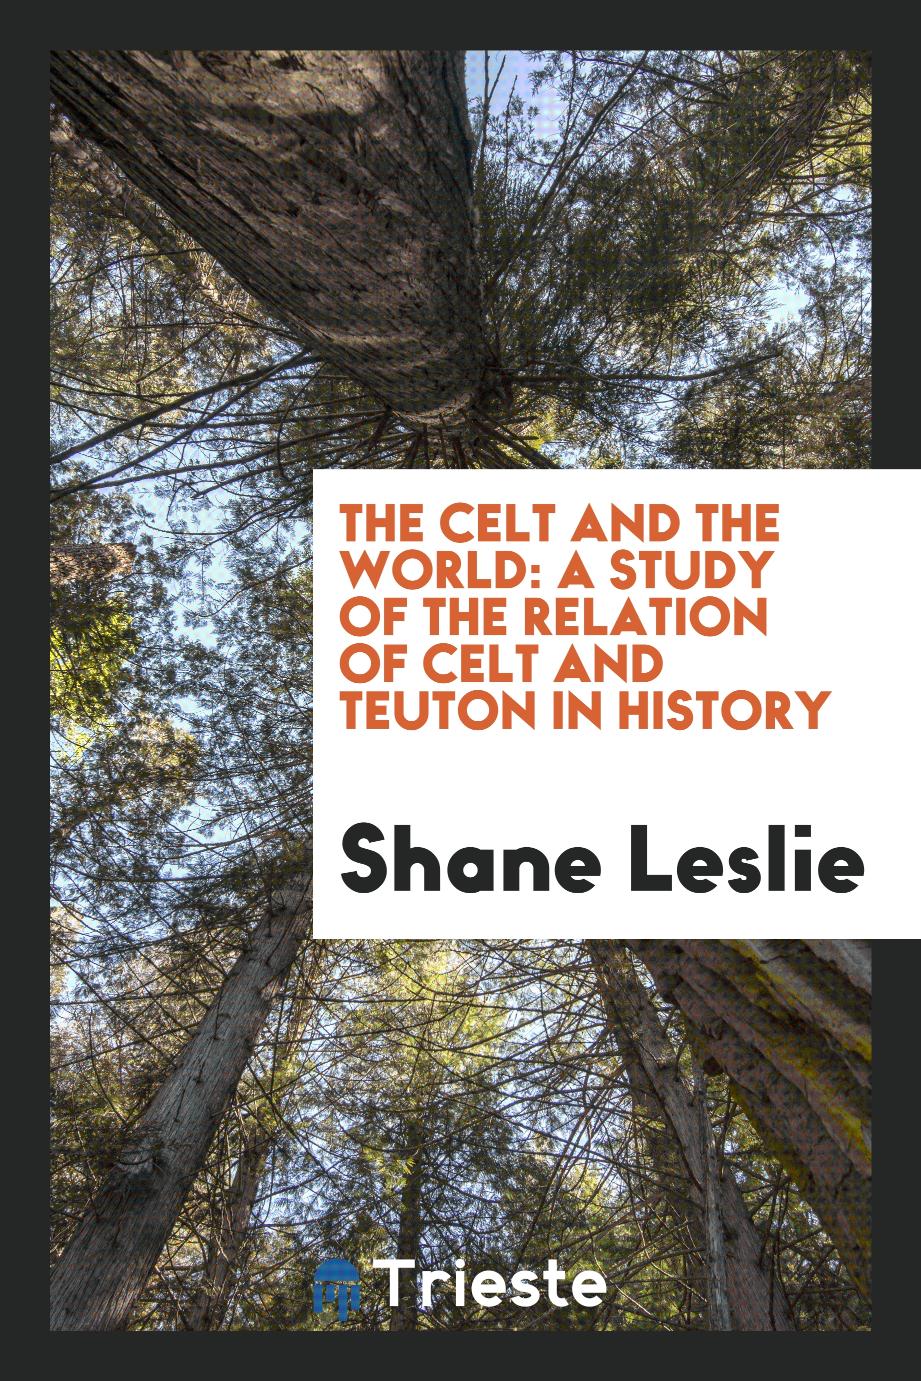 The Celt and the world: a study of the relation of Celt and Teuton in history